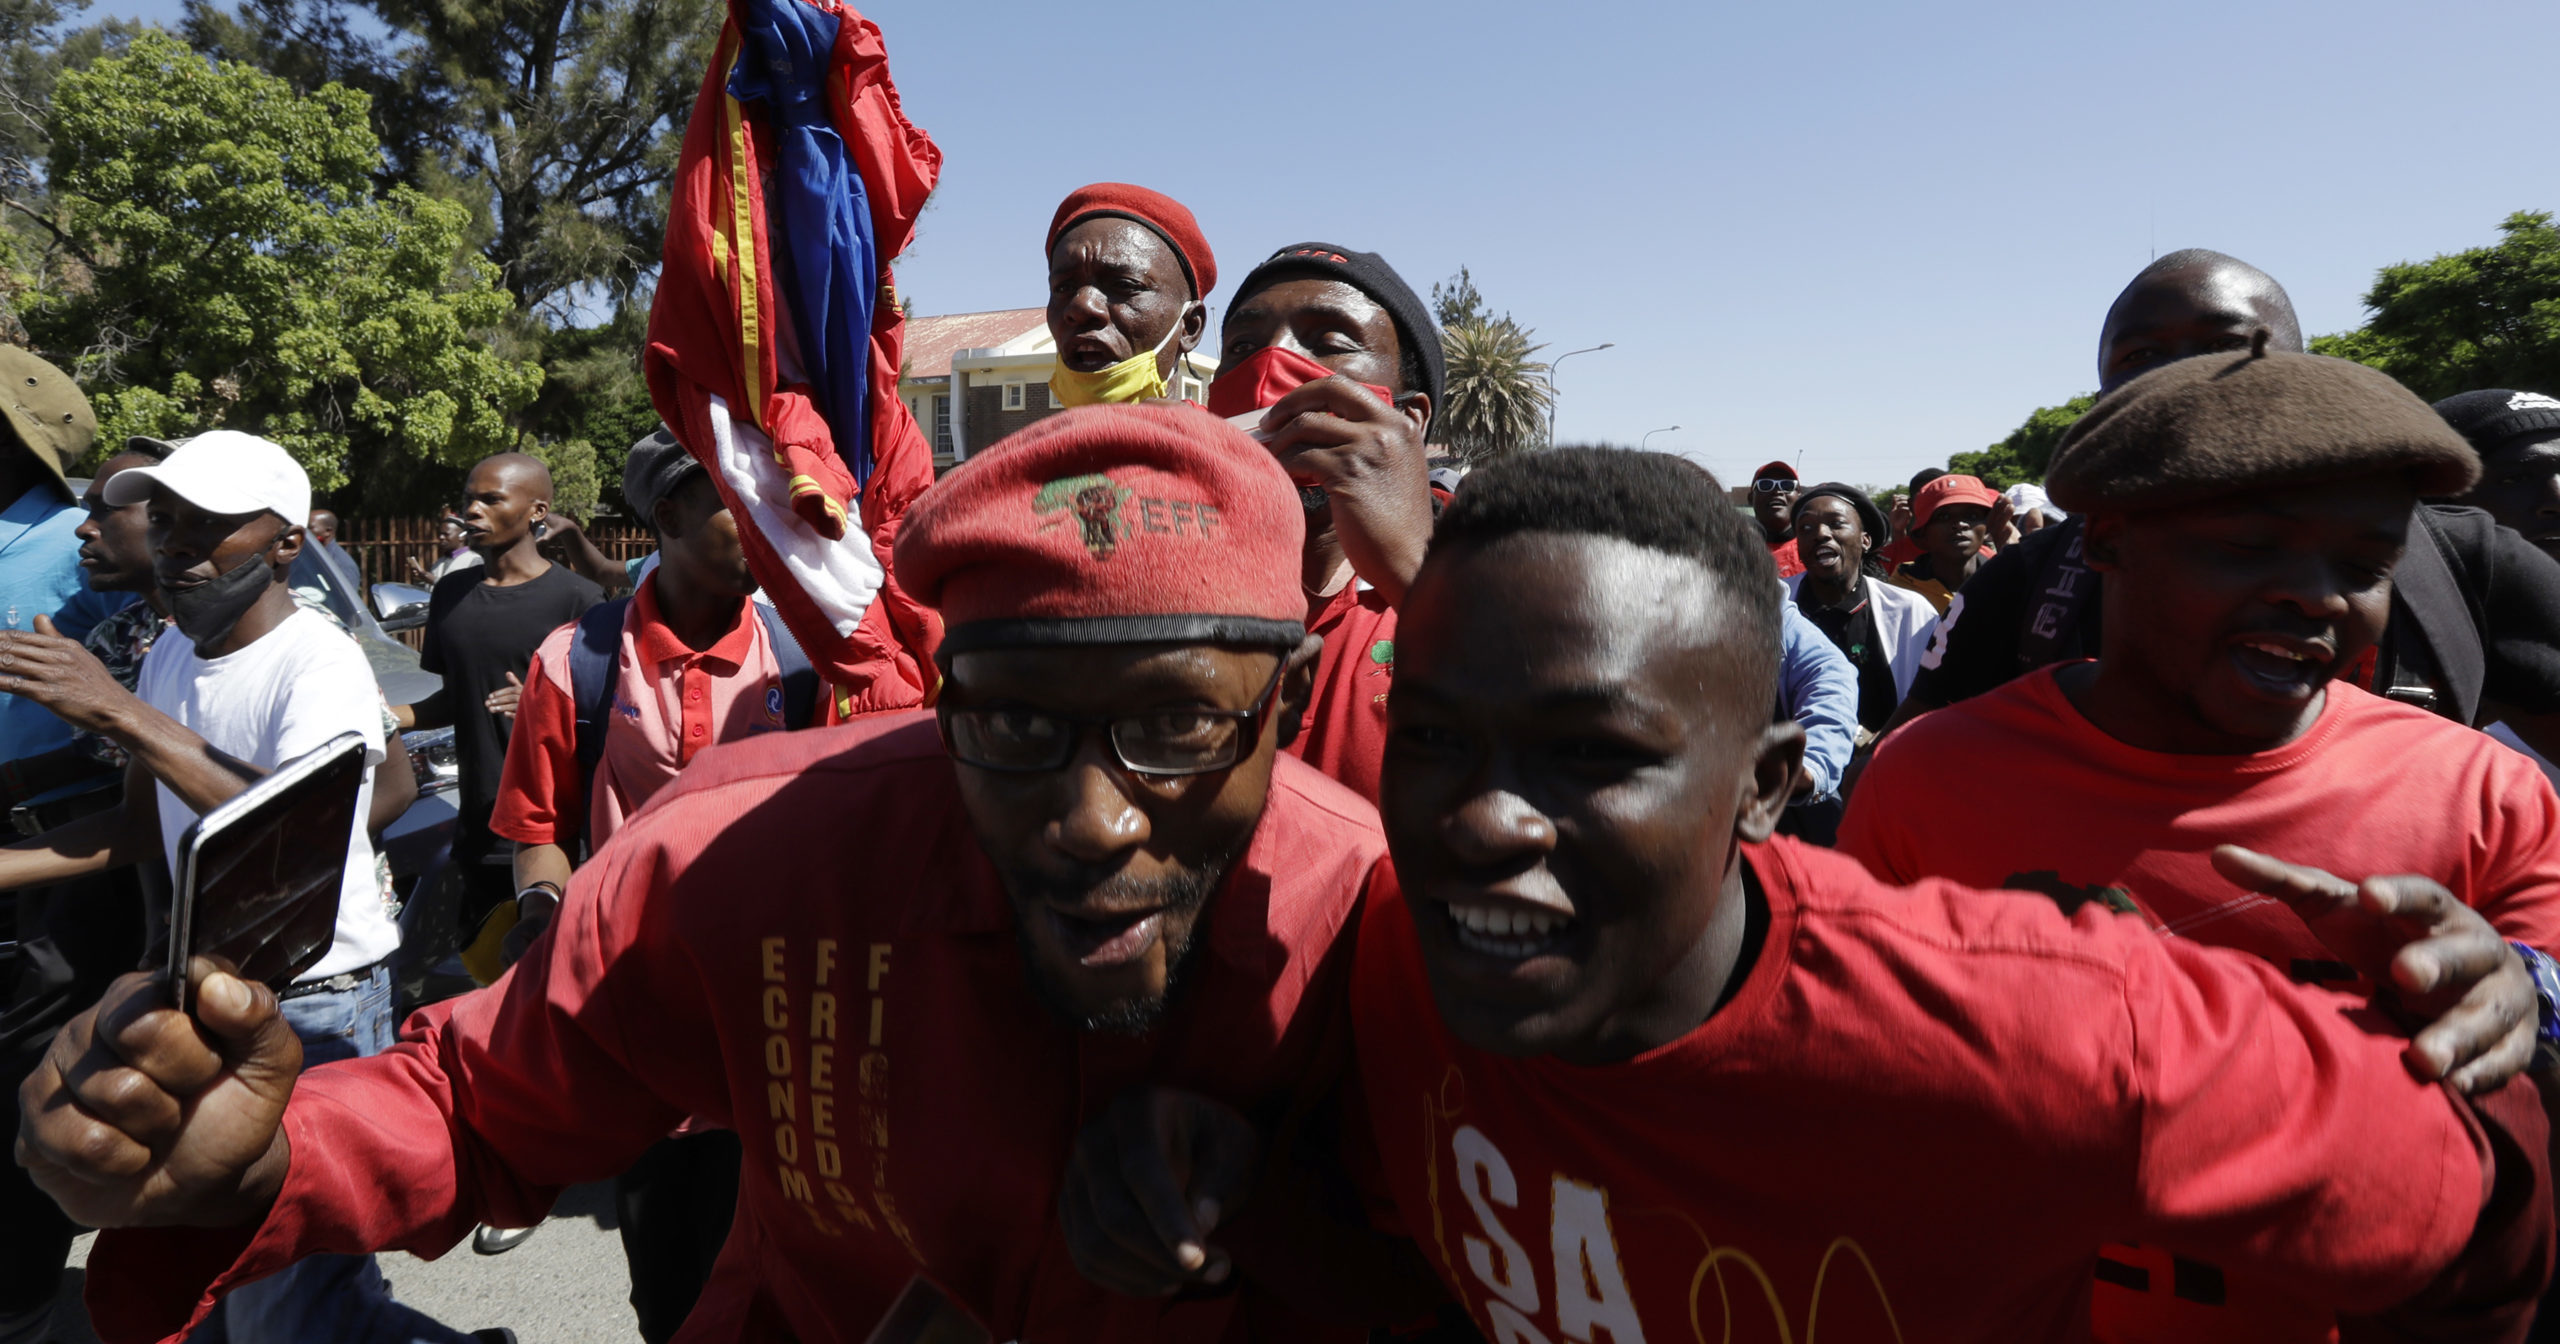 Members of the Economic Freedom Fighters protest Friday outside the magistrates court in Senekal, South Africa, where two suspects were to appear on charges of killing a white farmer.